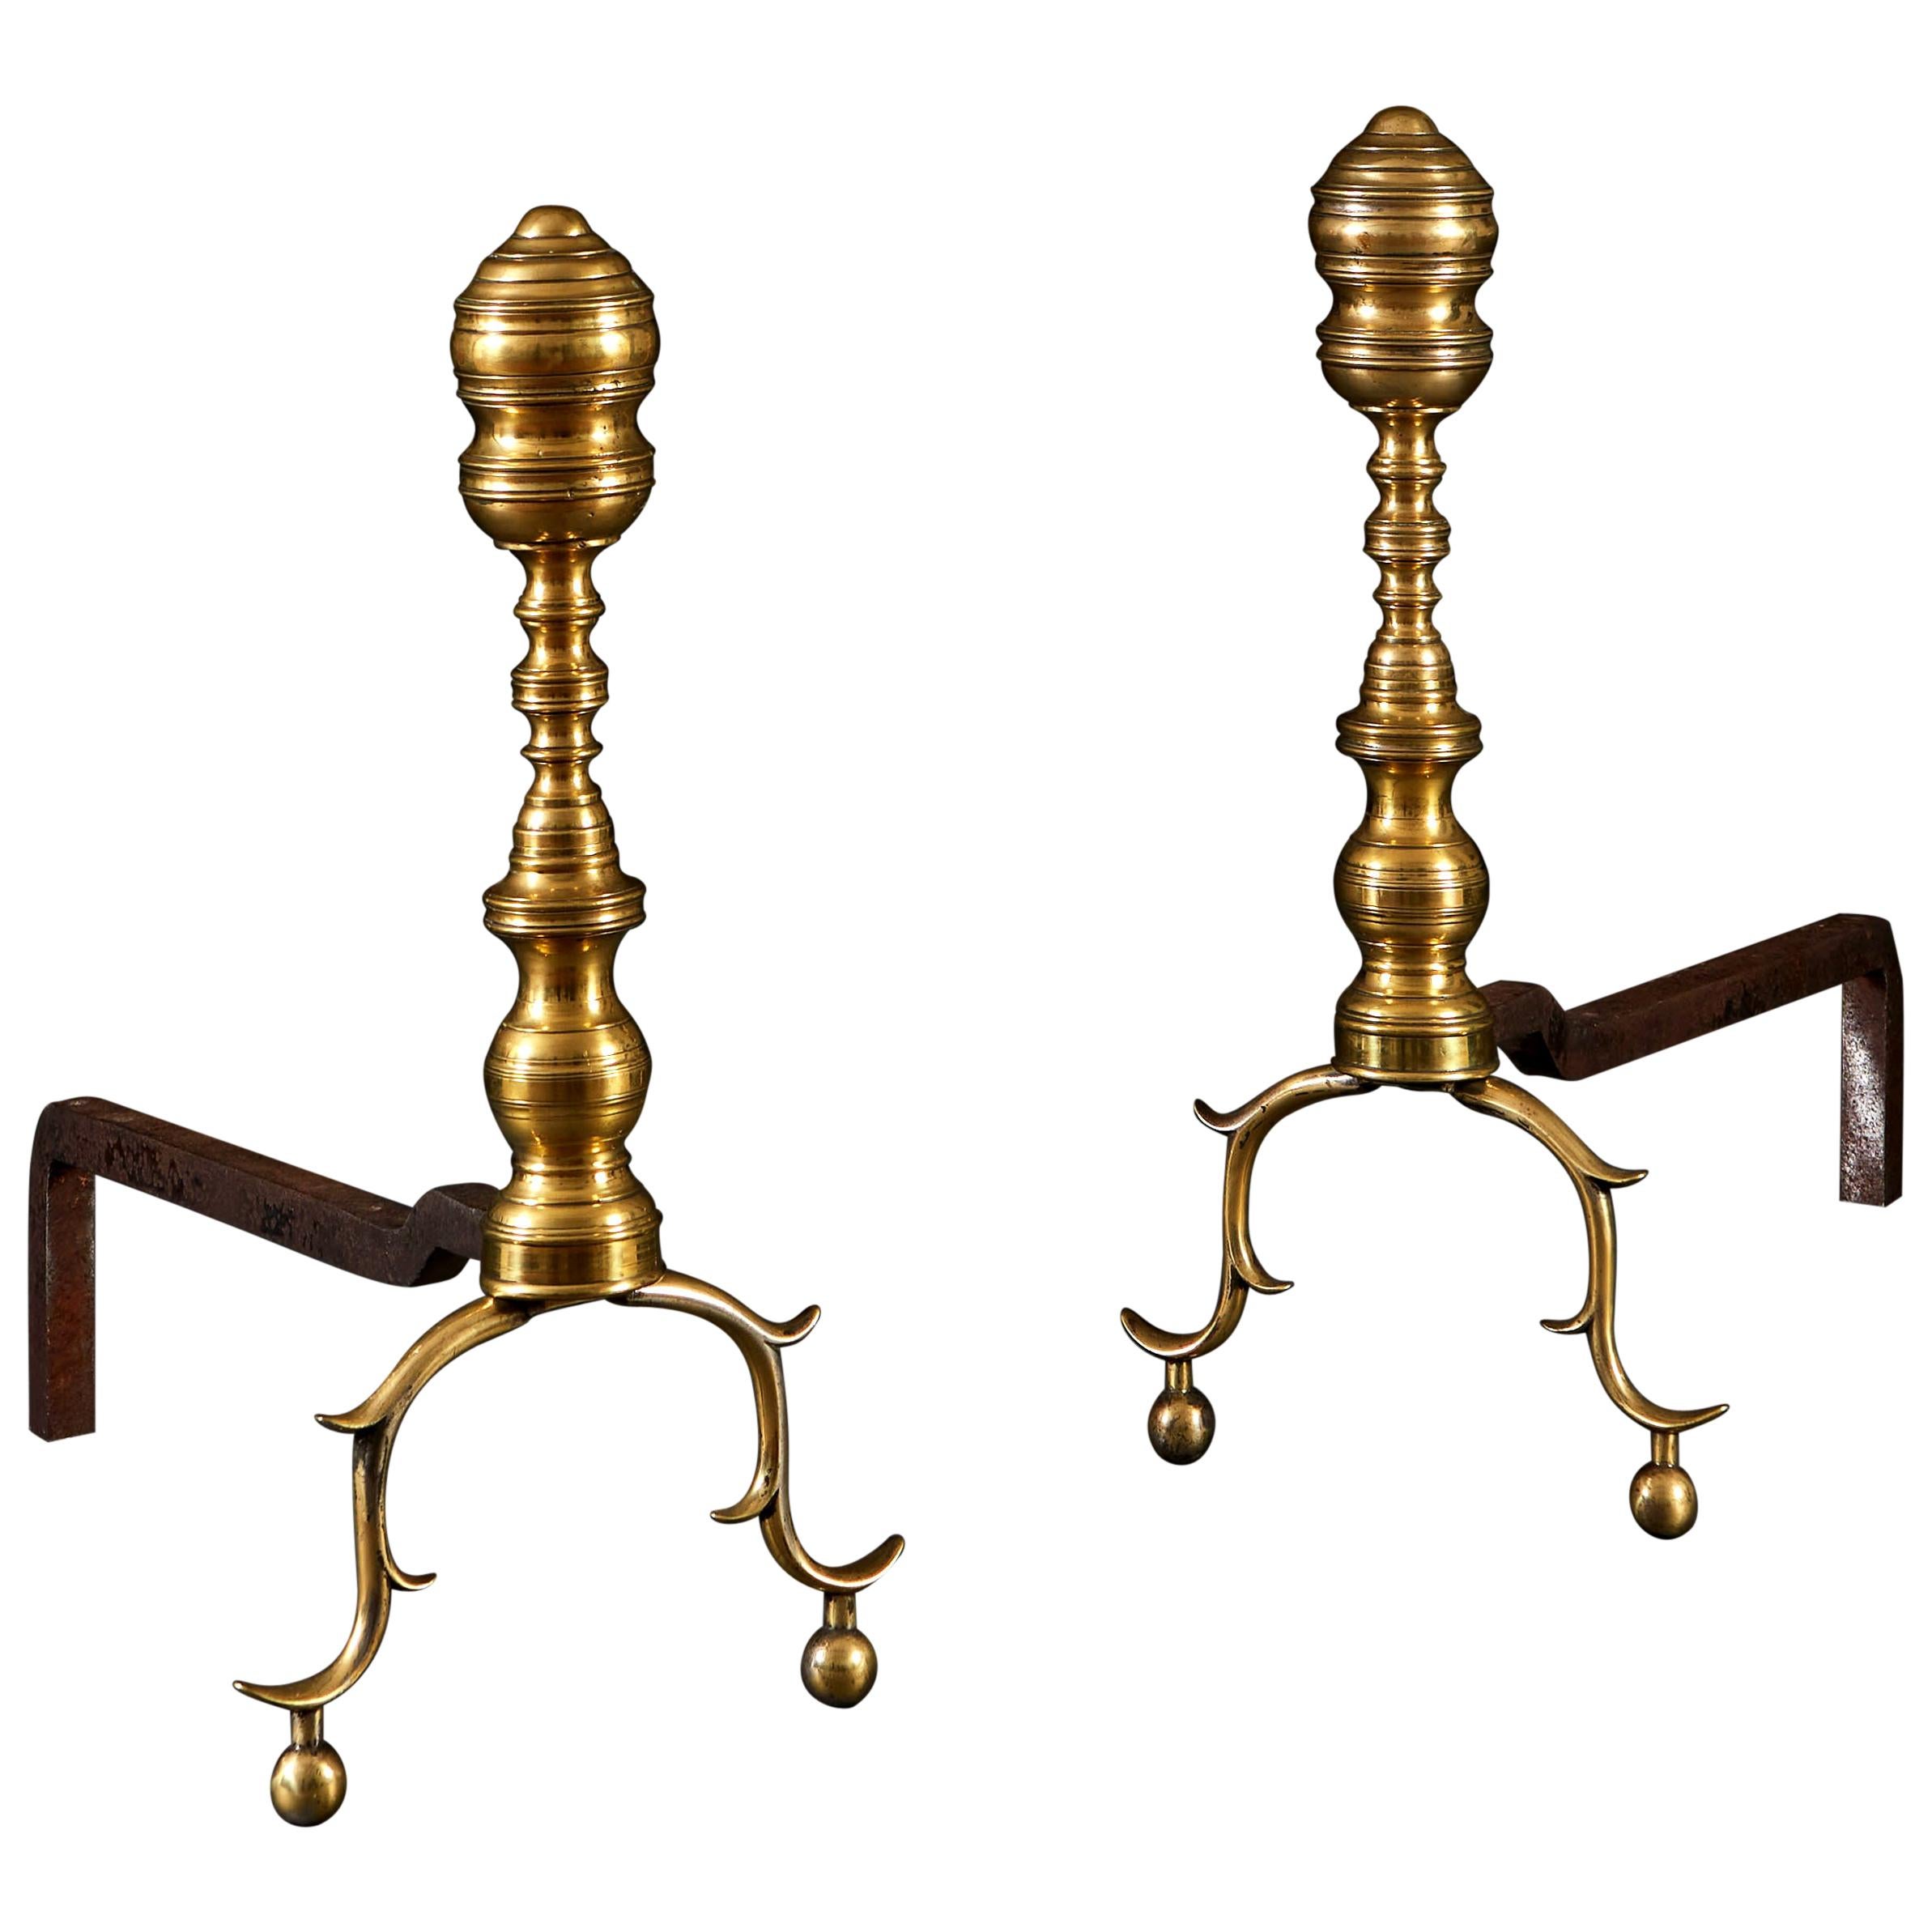 Pair of 19th Century American Brass Fire Dogs